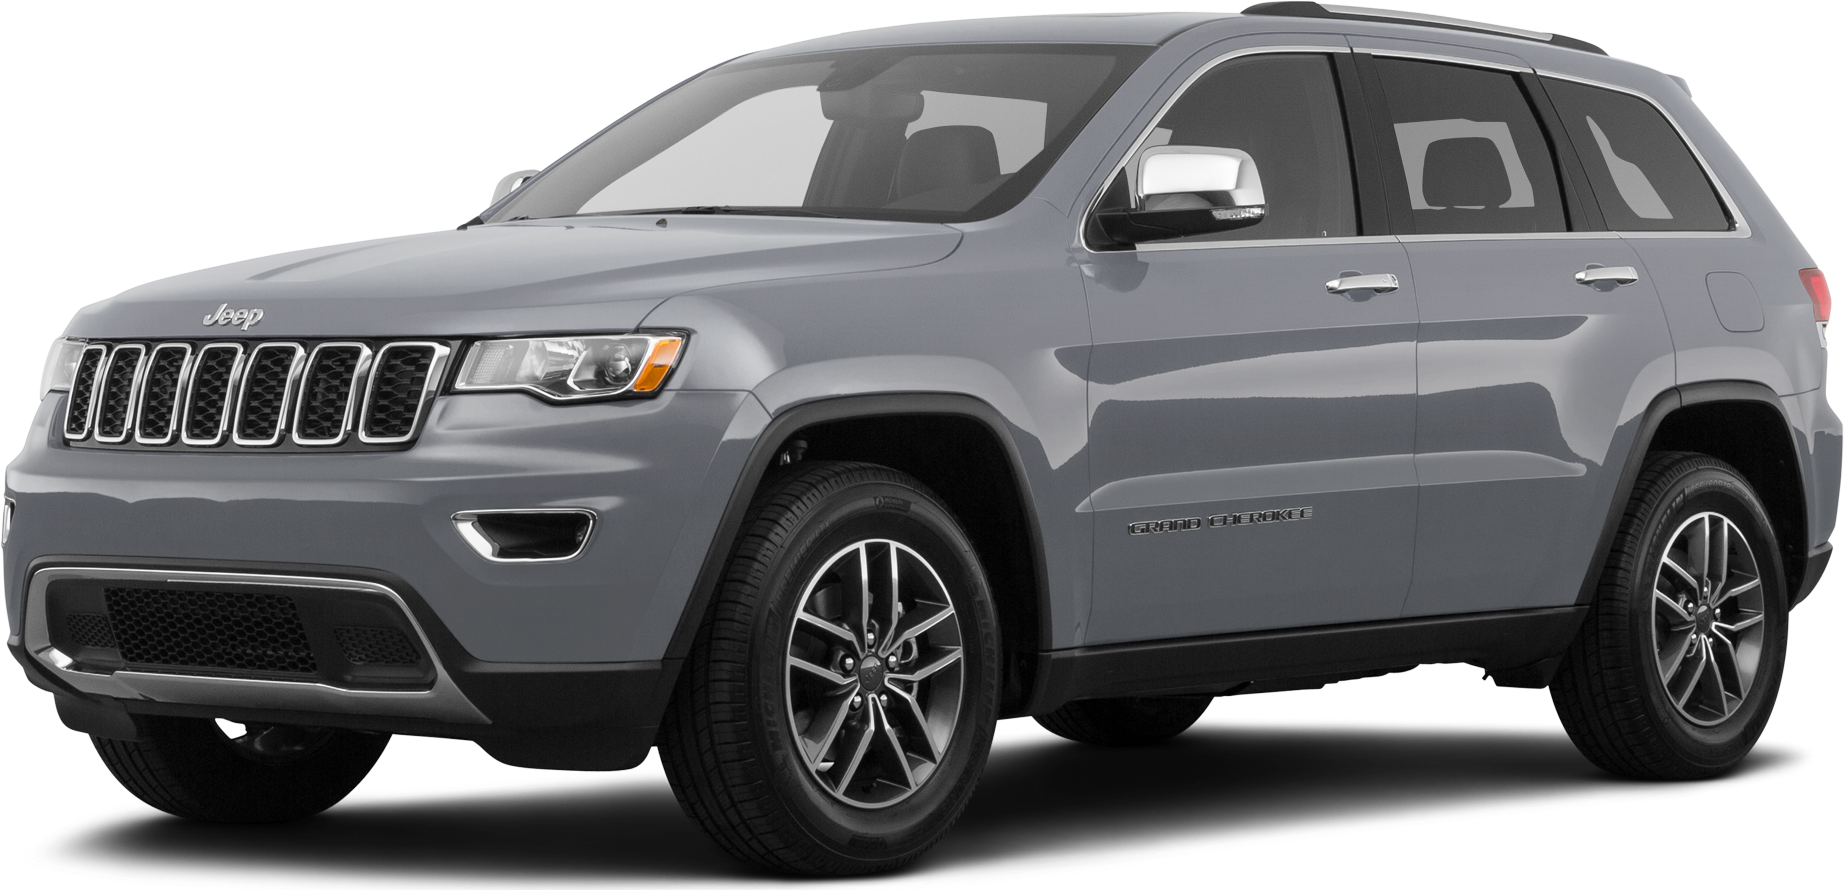 2021 Jeep Grand Cherokee Reviews Pricing And Specs Kelley Blue Book